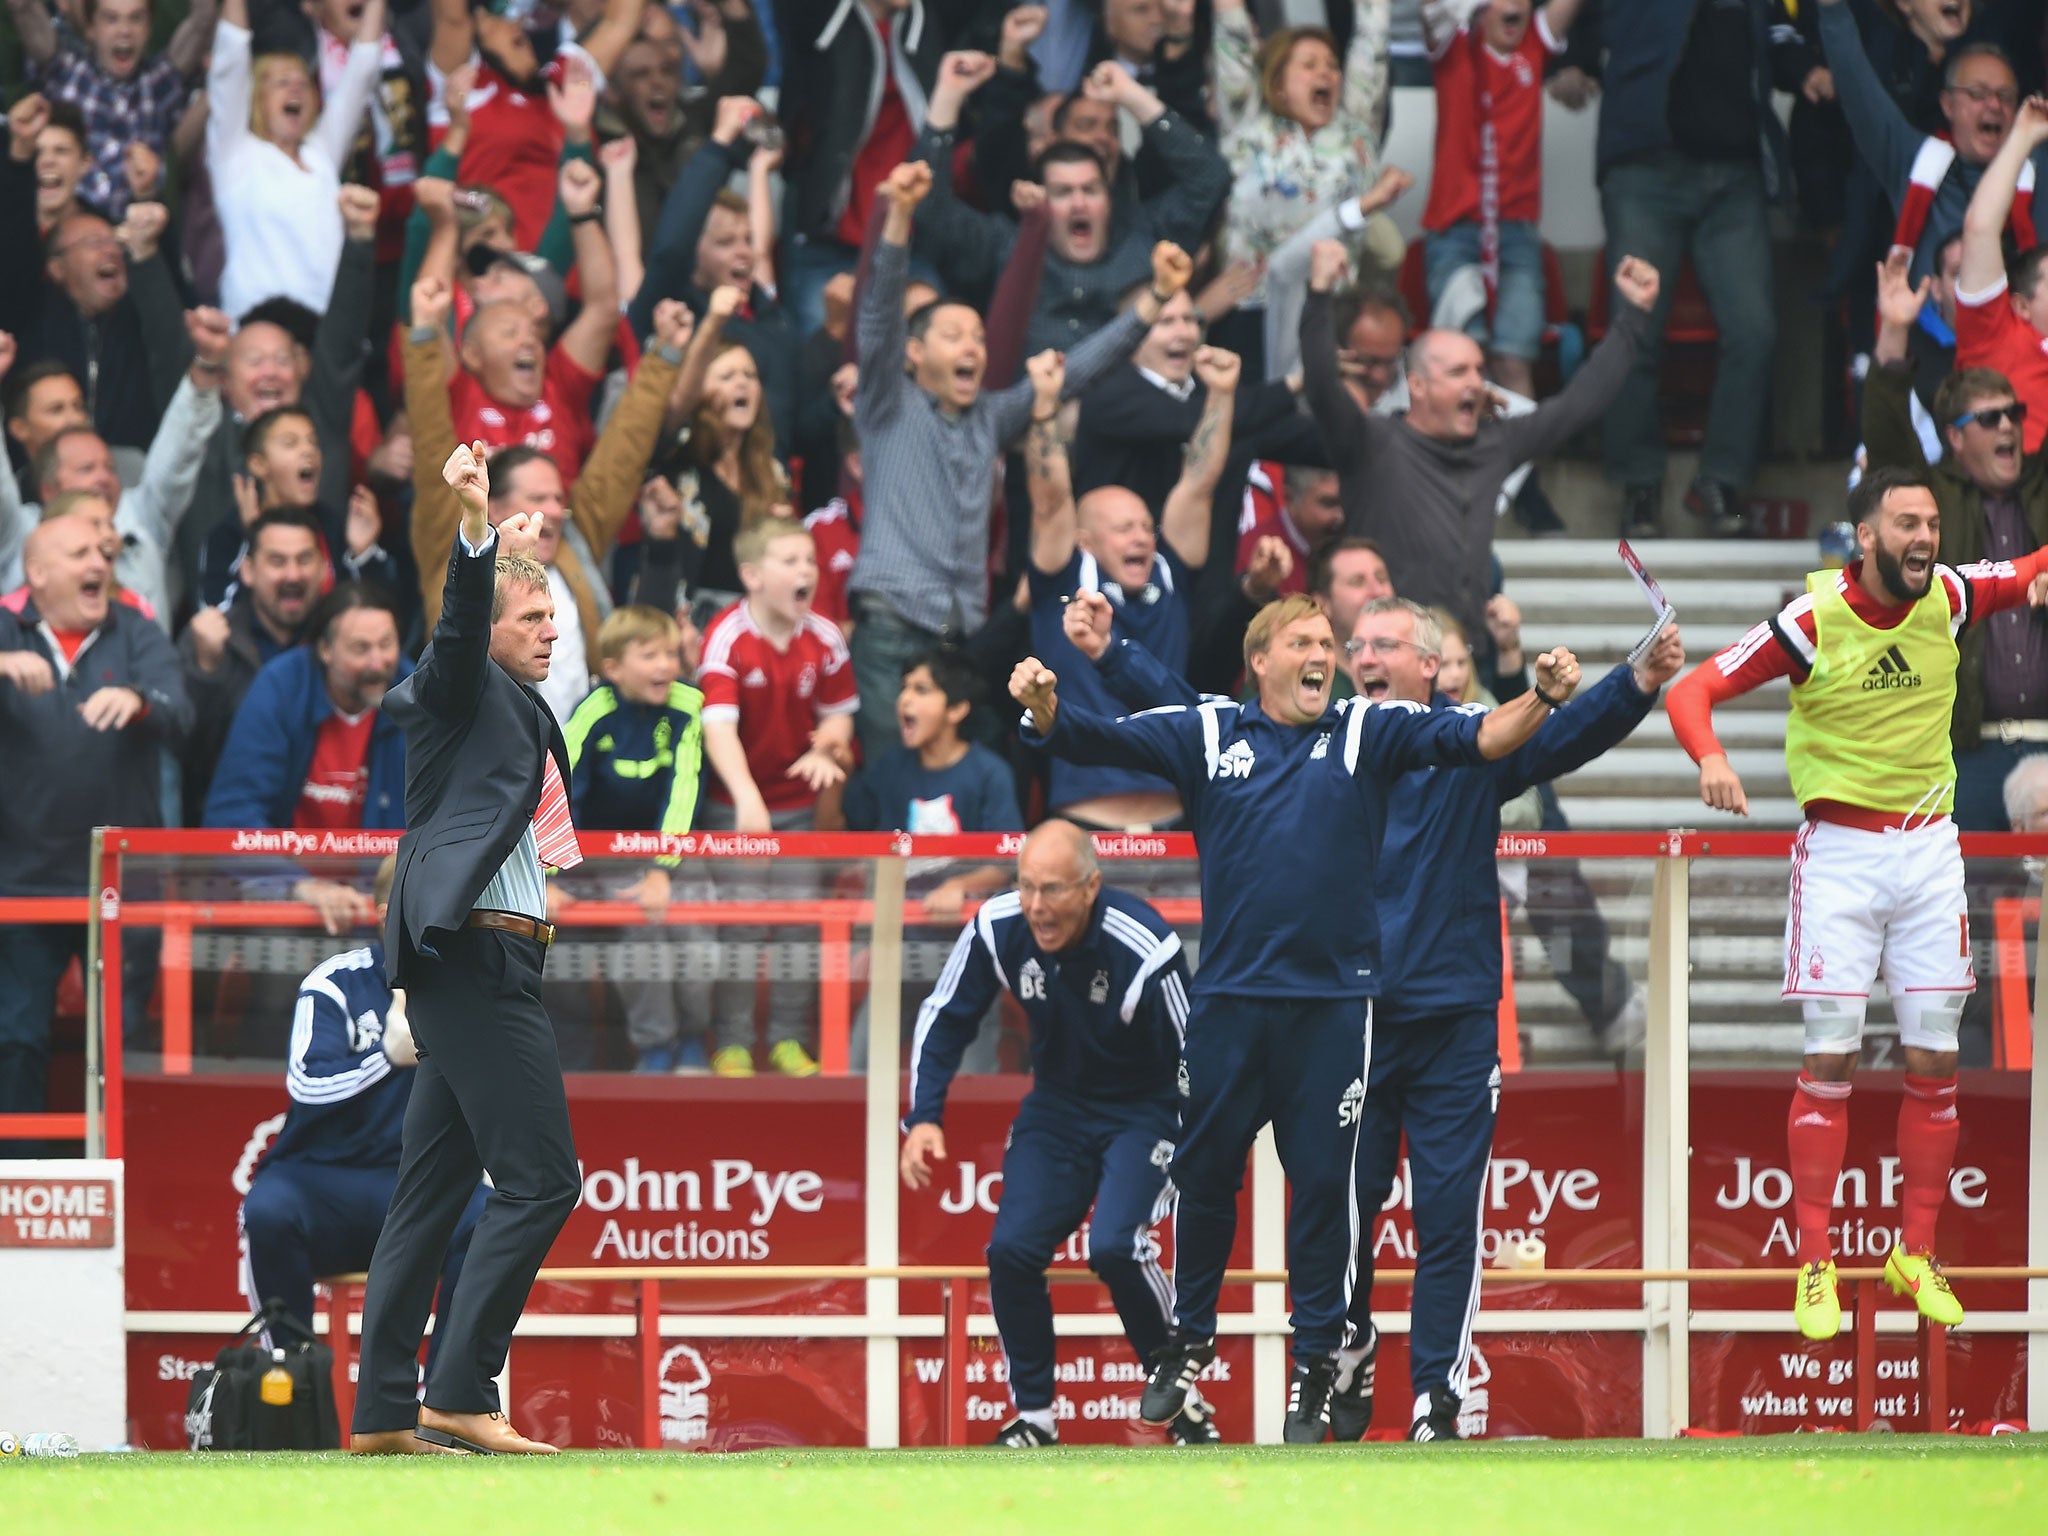 Nottingham Forest staff and substitutes celebrate Britt Assombalonga's goal against Derby